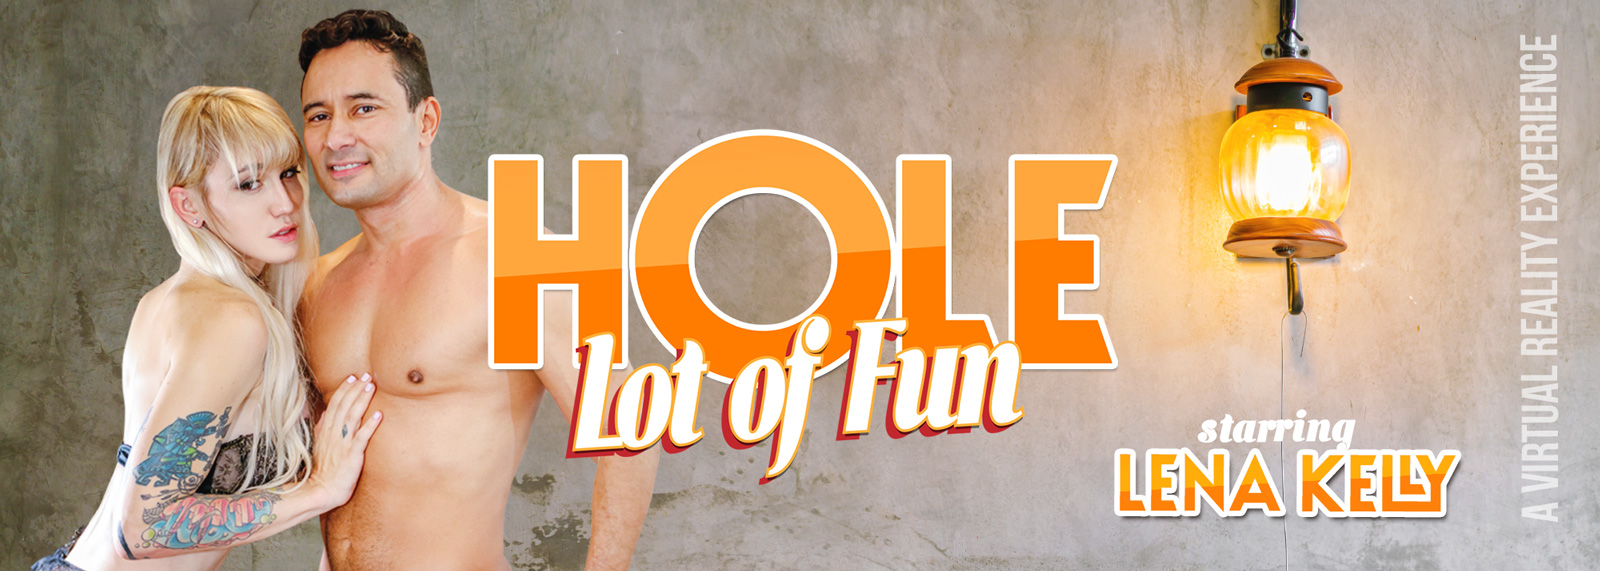 A Hole Lot of Fun - VR Porn Video, Starring: Lena Kelly VR